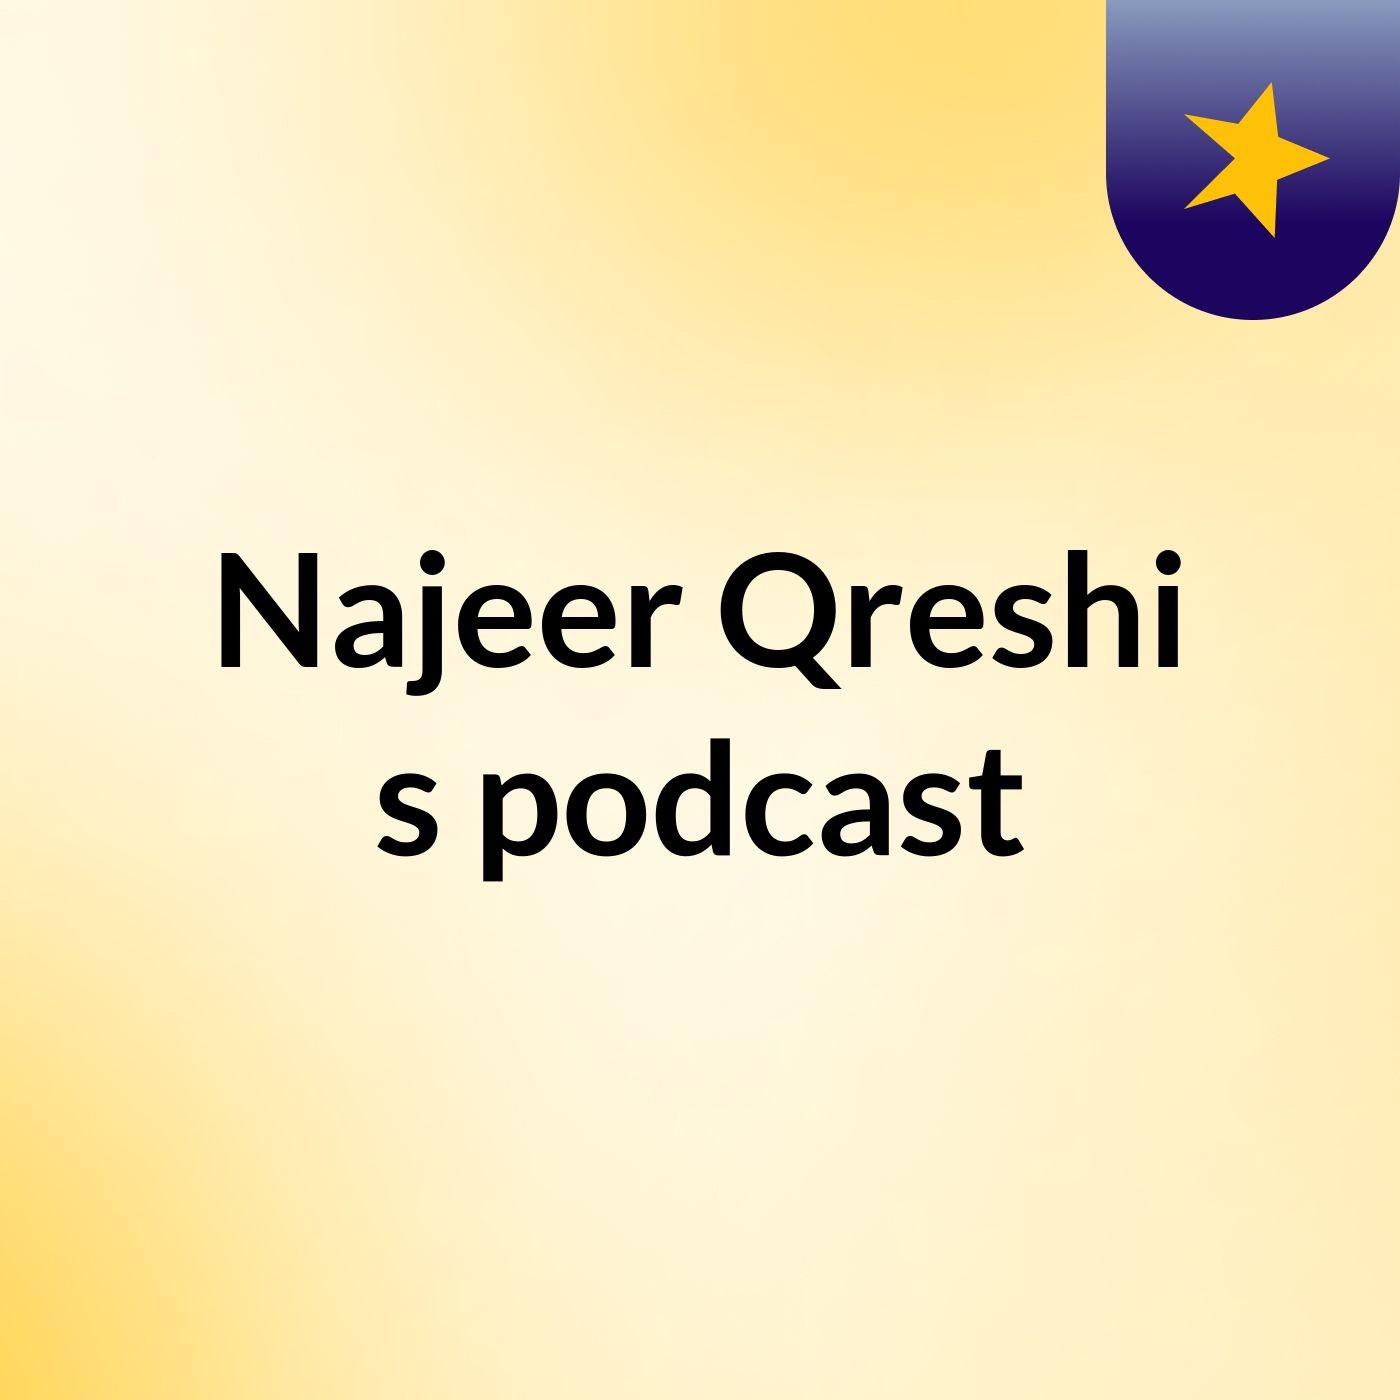 Najeer Qreshi's podcast